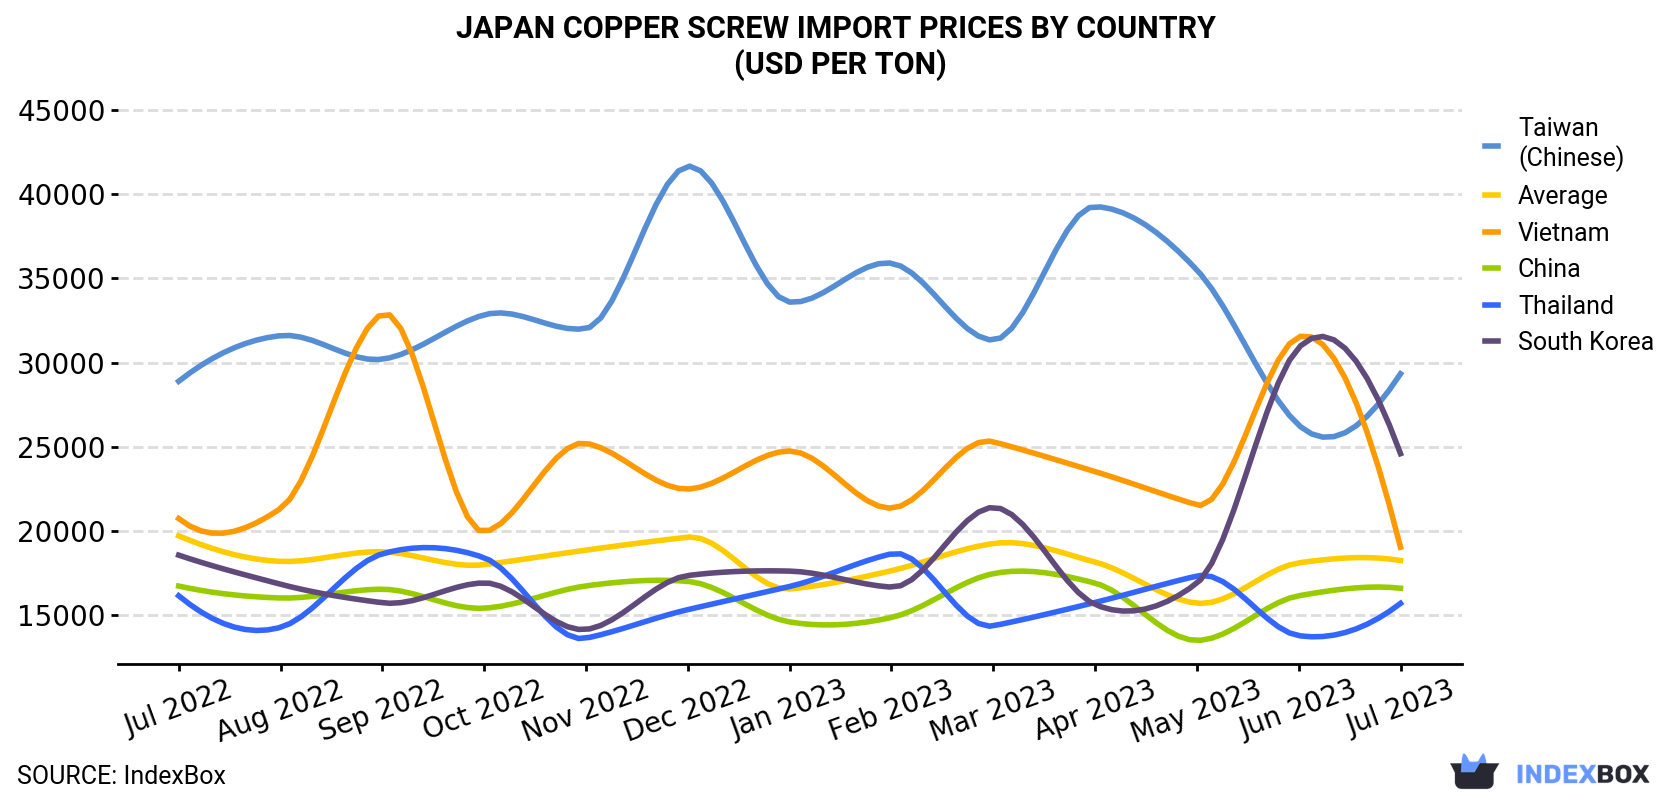 Japan Copper Screw Import Prices By Country (USD Per Ton)